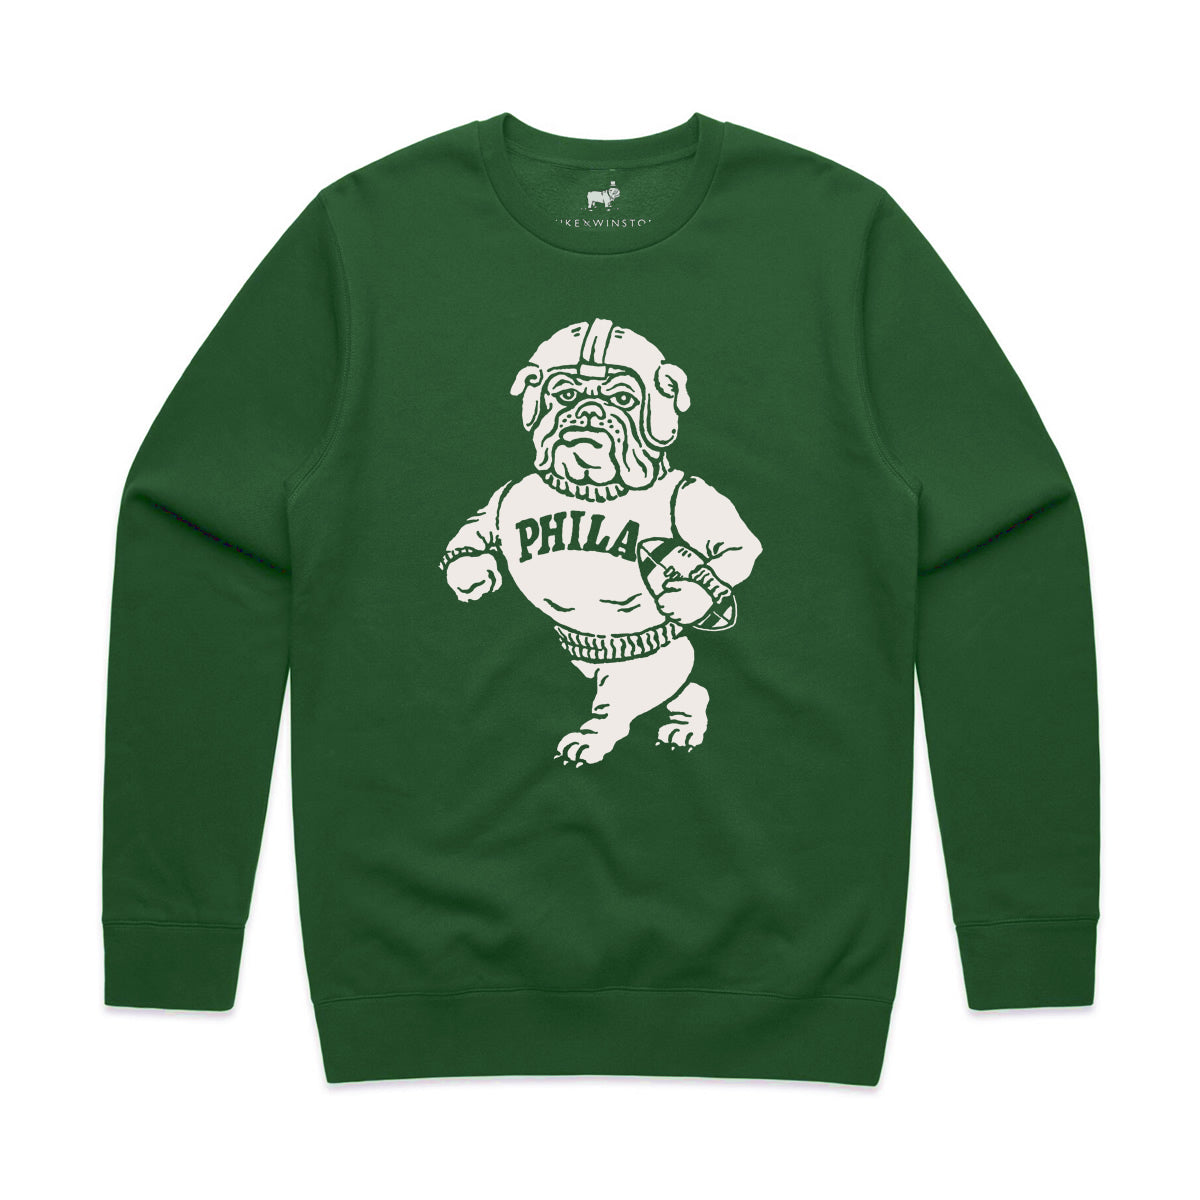 Its A Philly Thing Shirt (Eagles Kelly Green)